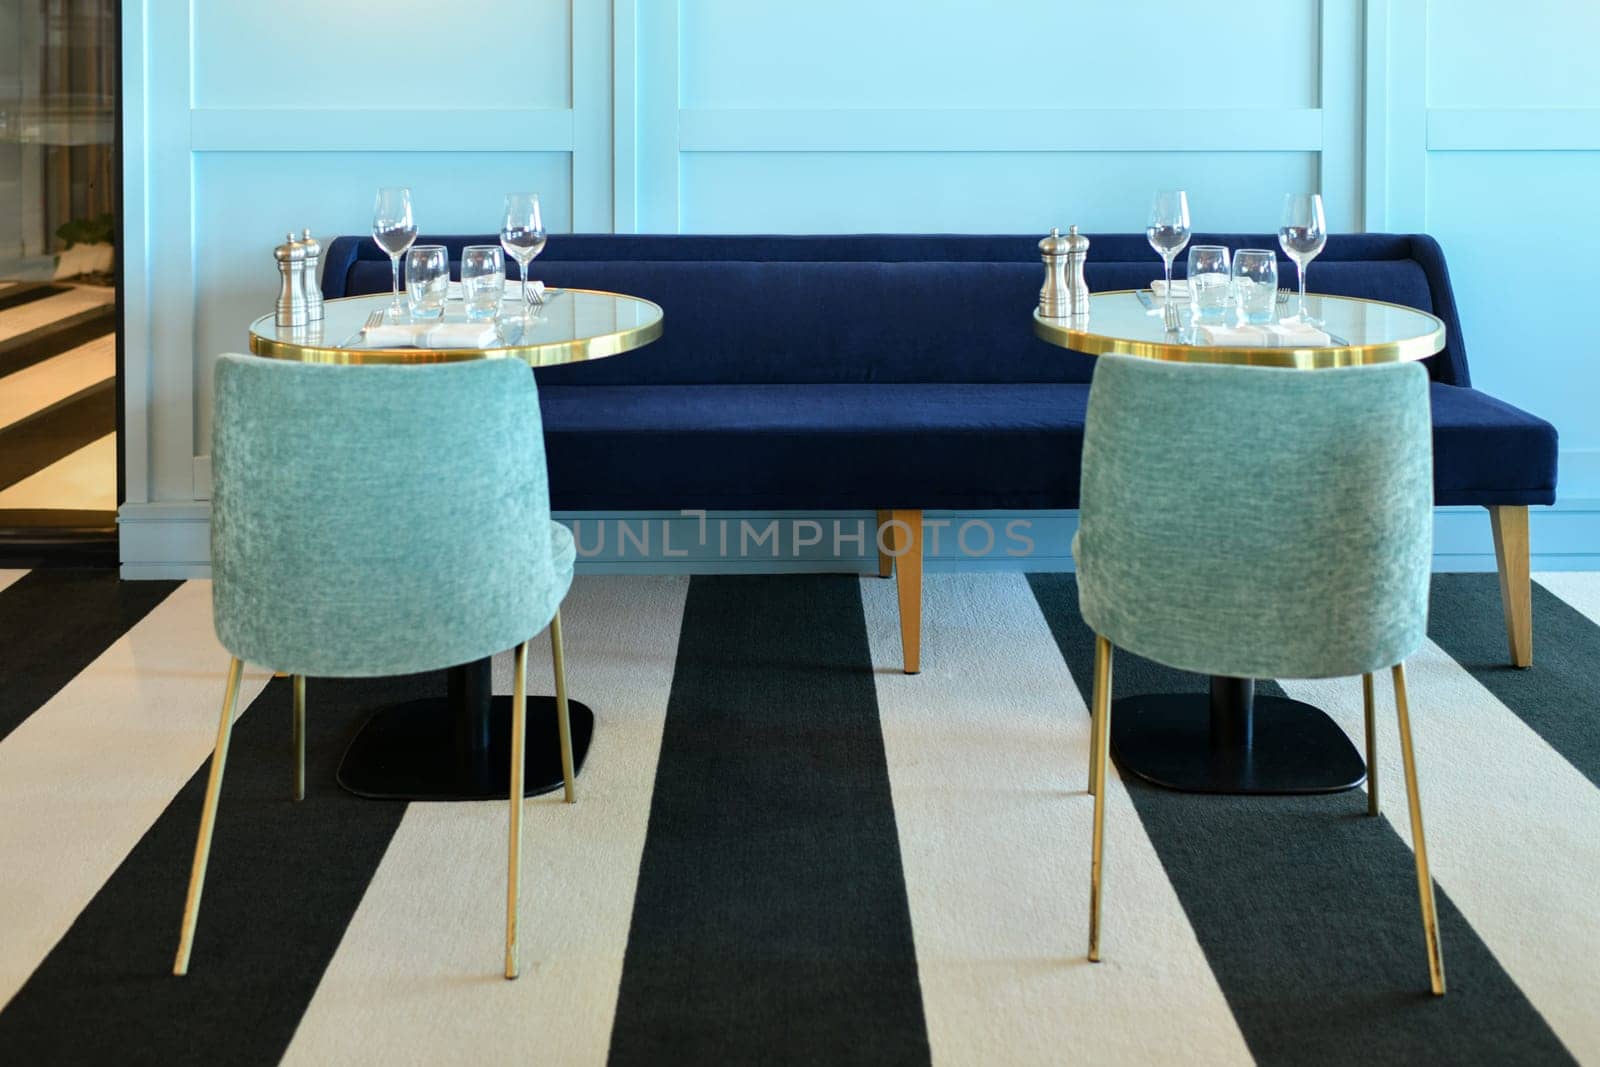 Served tables in a modern blue restaurant interior